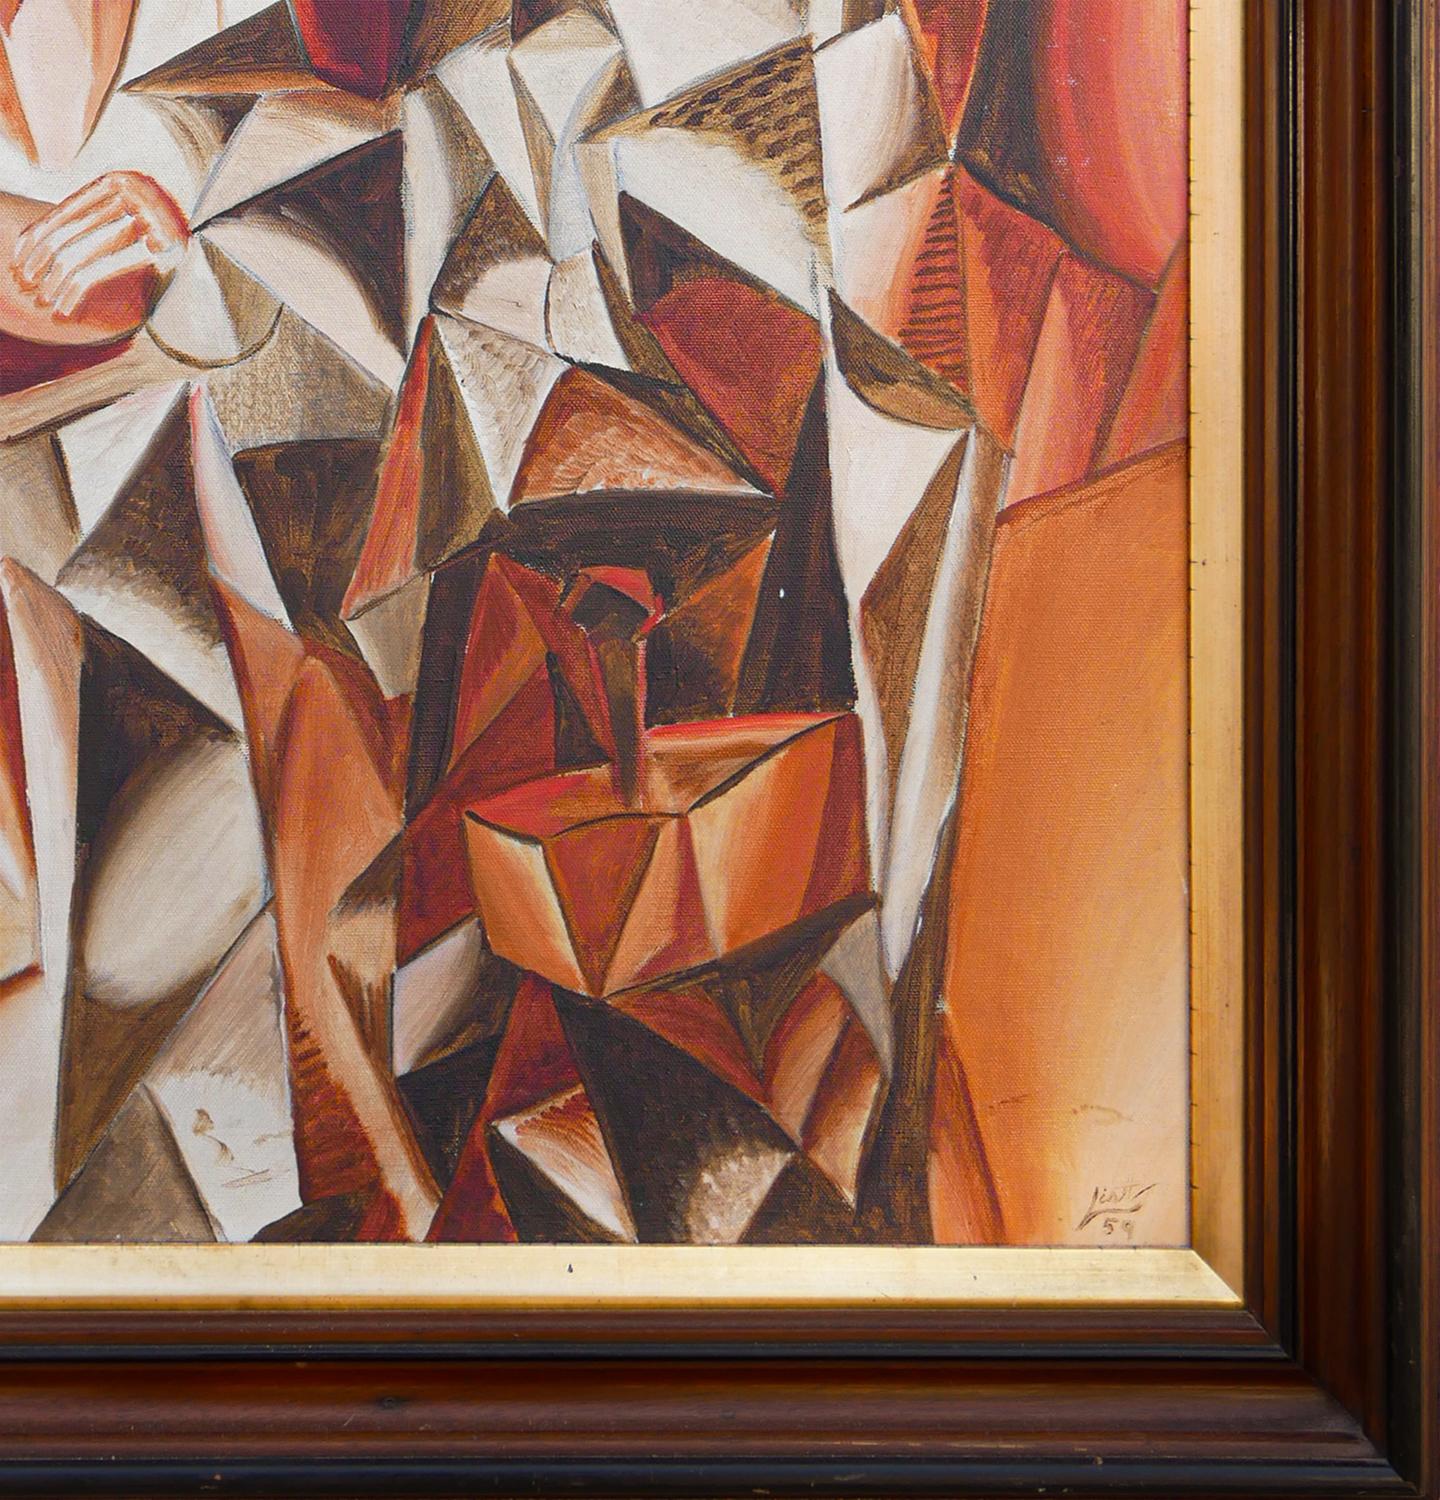 “Dienstag” Orange, Red, and Brown Abstract Cubist Figurative Painting 4